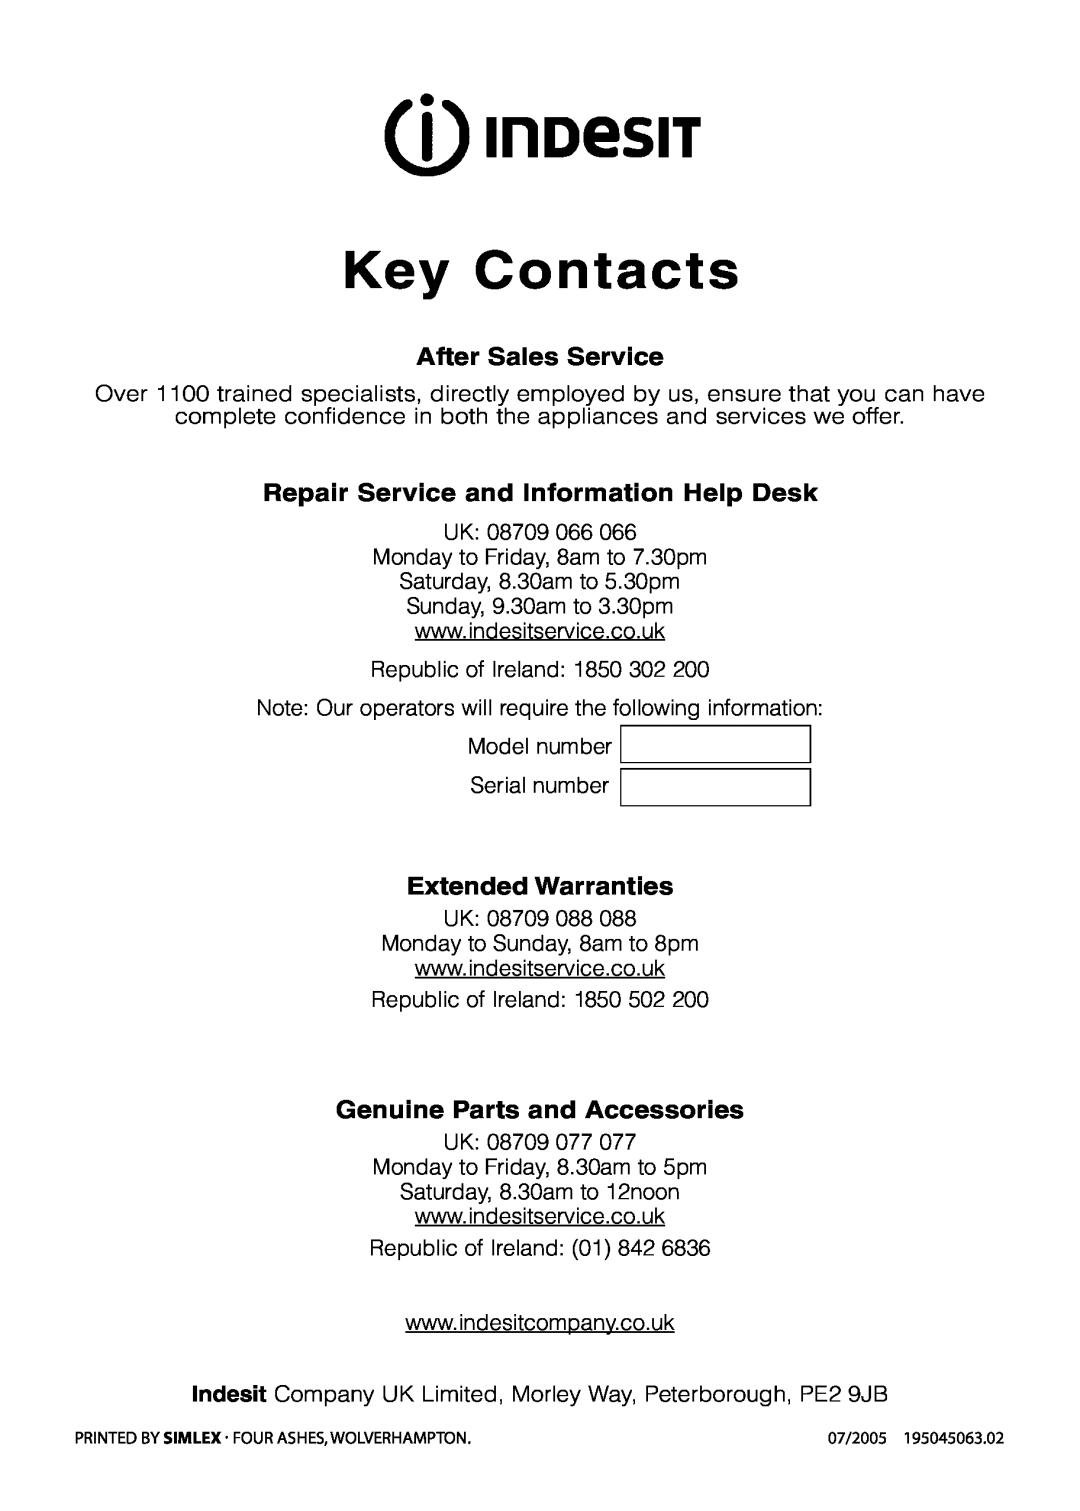 Indesit KD6C0E, KD6C8E Key Contacts, After Sales Service, Repair Service and Information Help Desk, Extended Warranties 